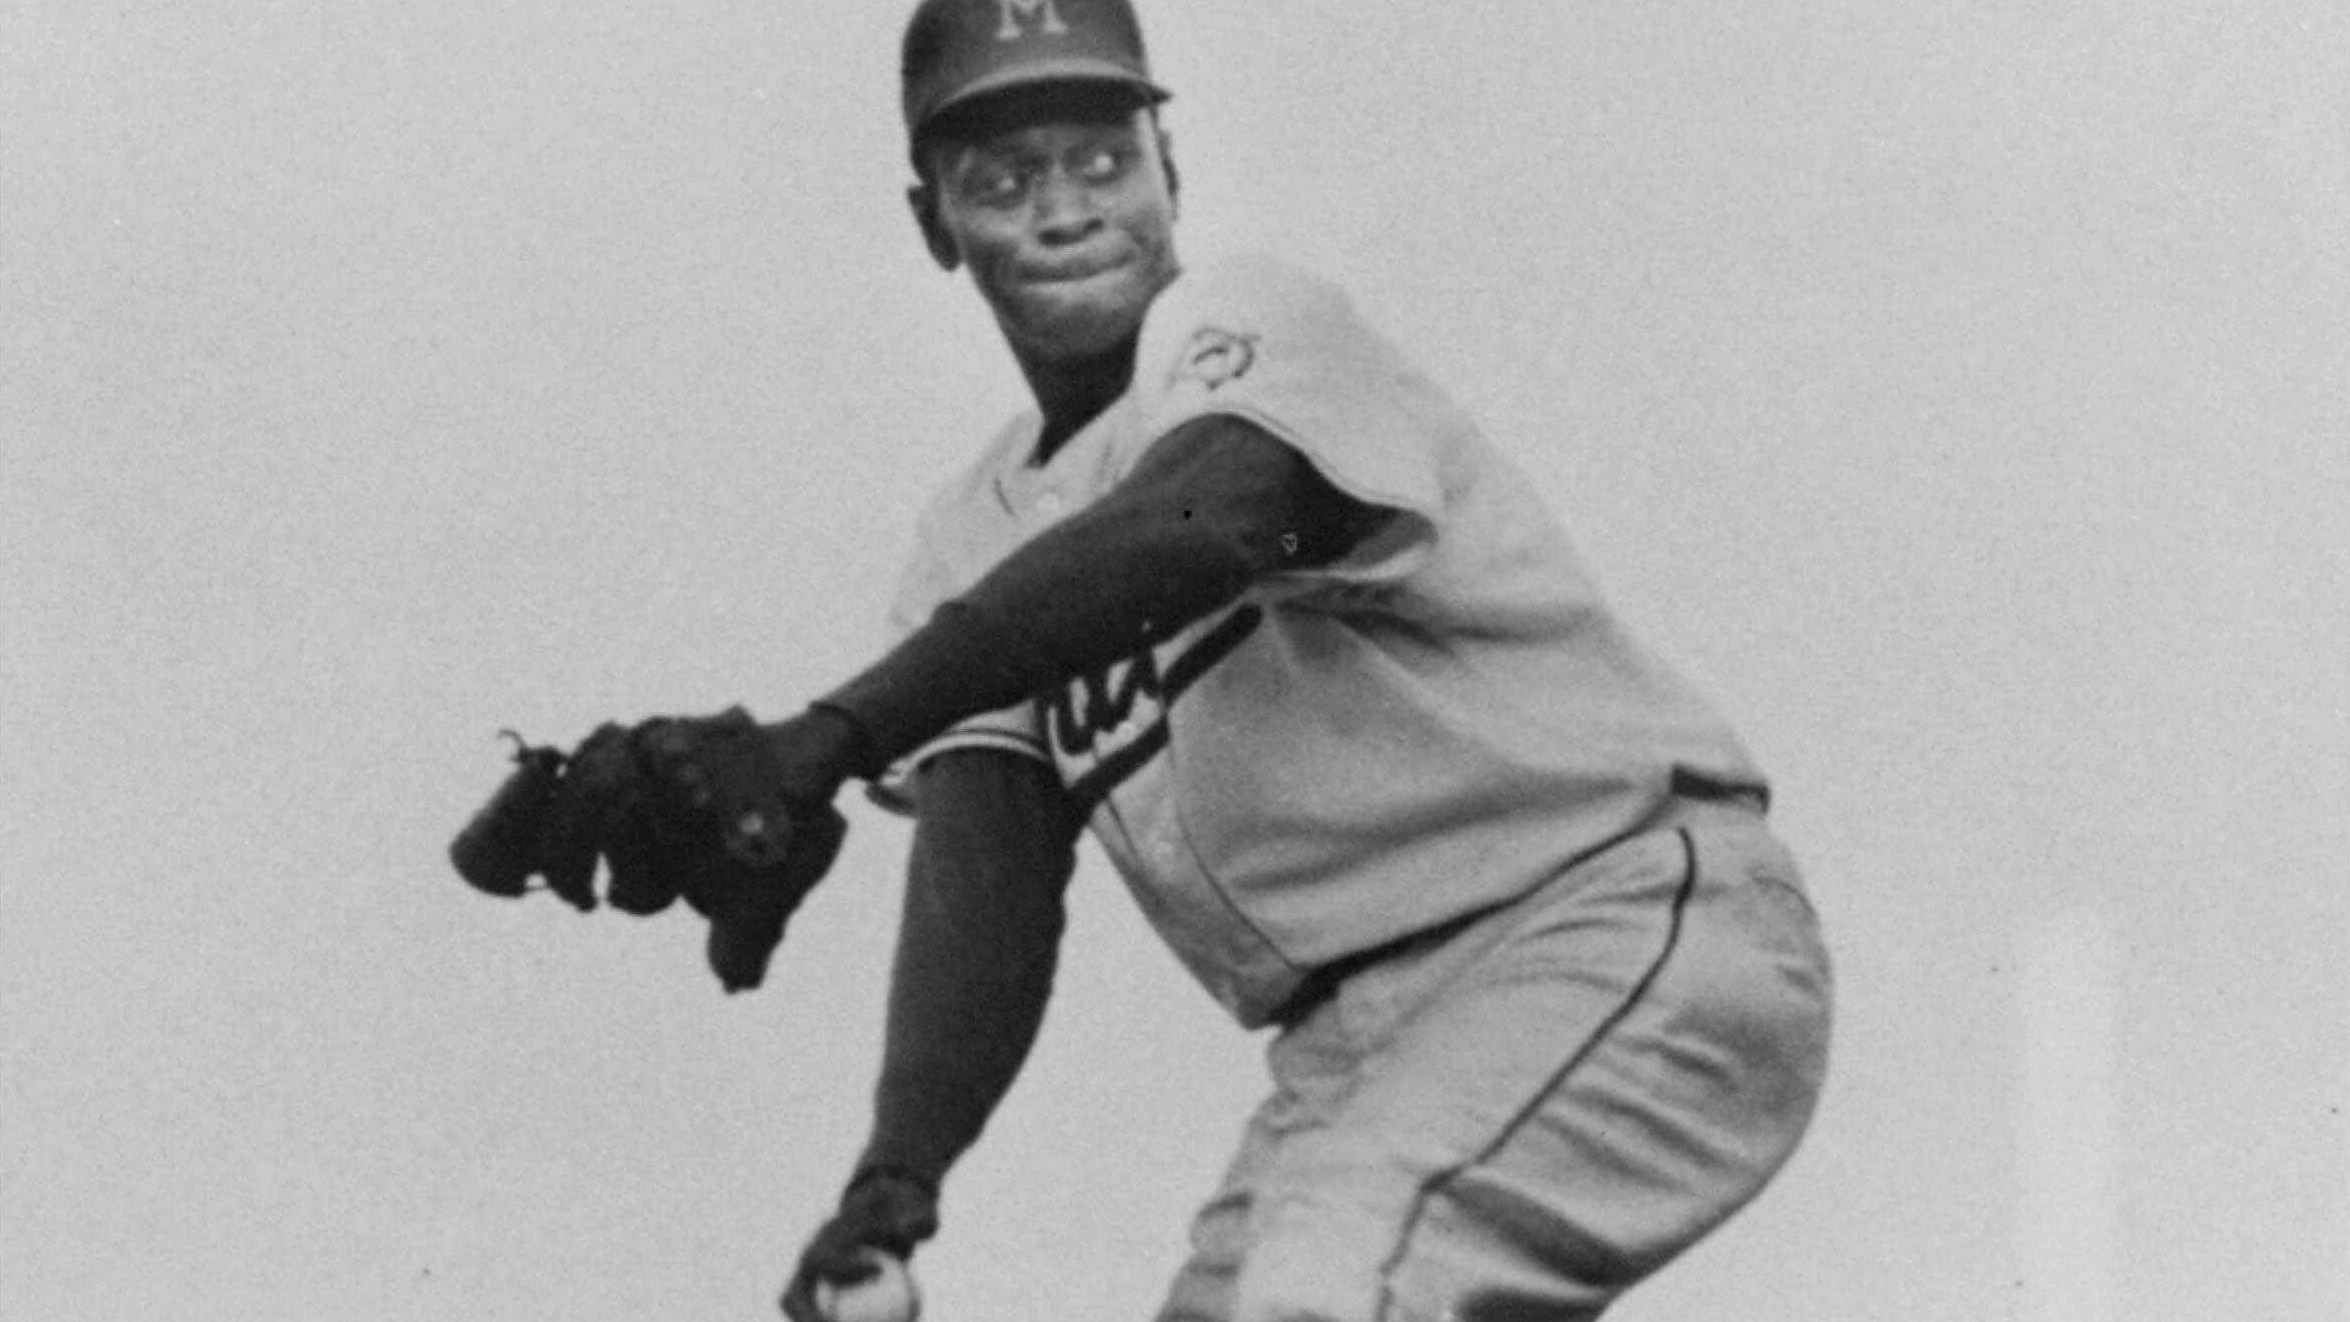 Now pitching - Satchel Paige